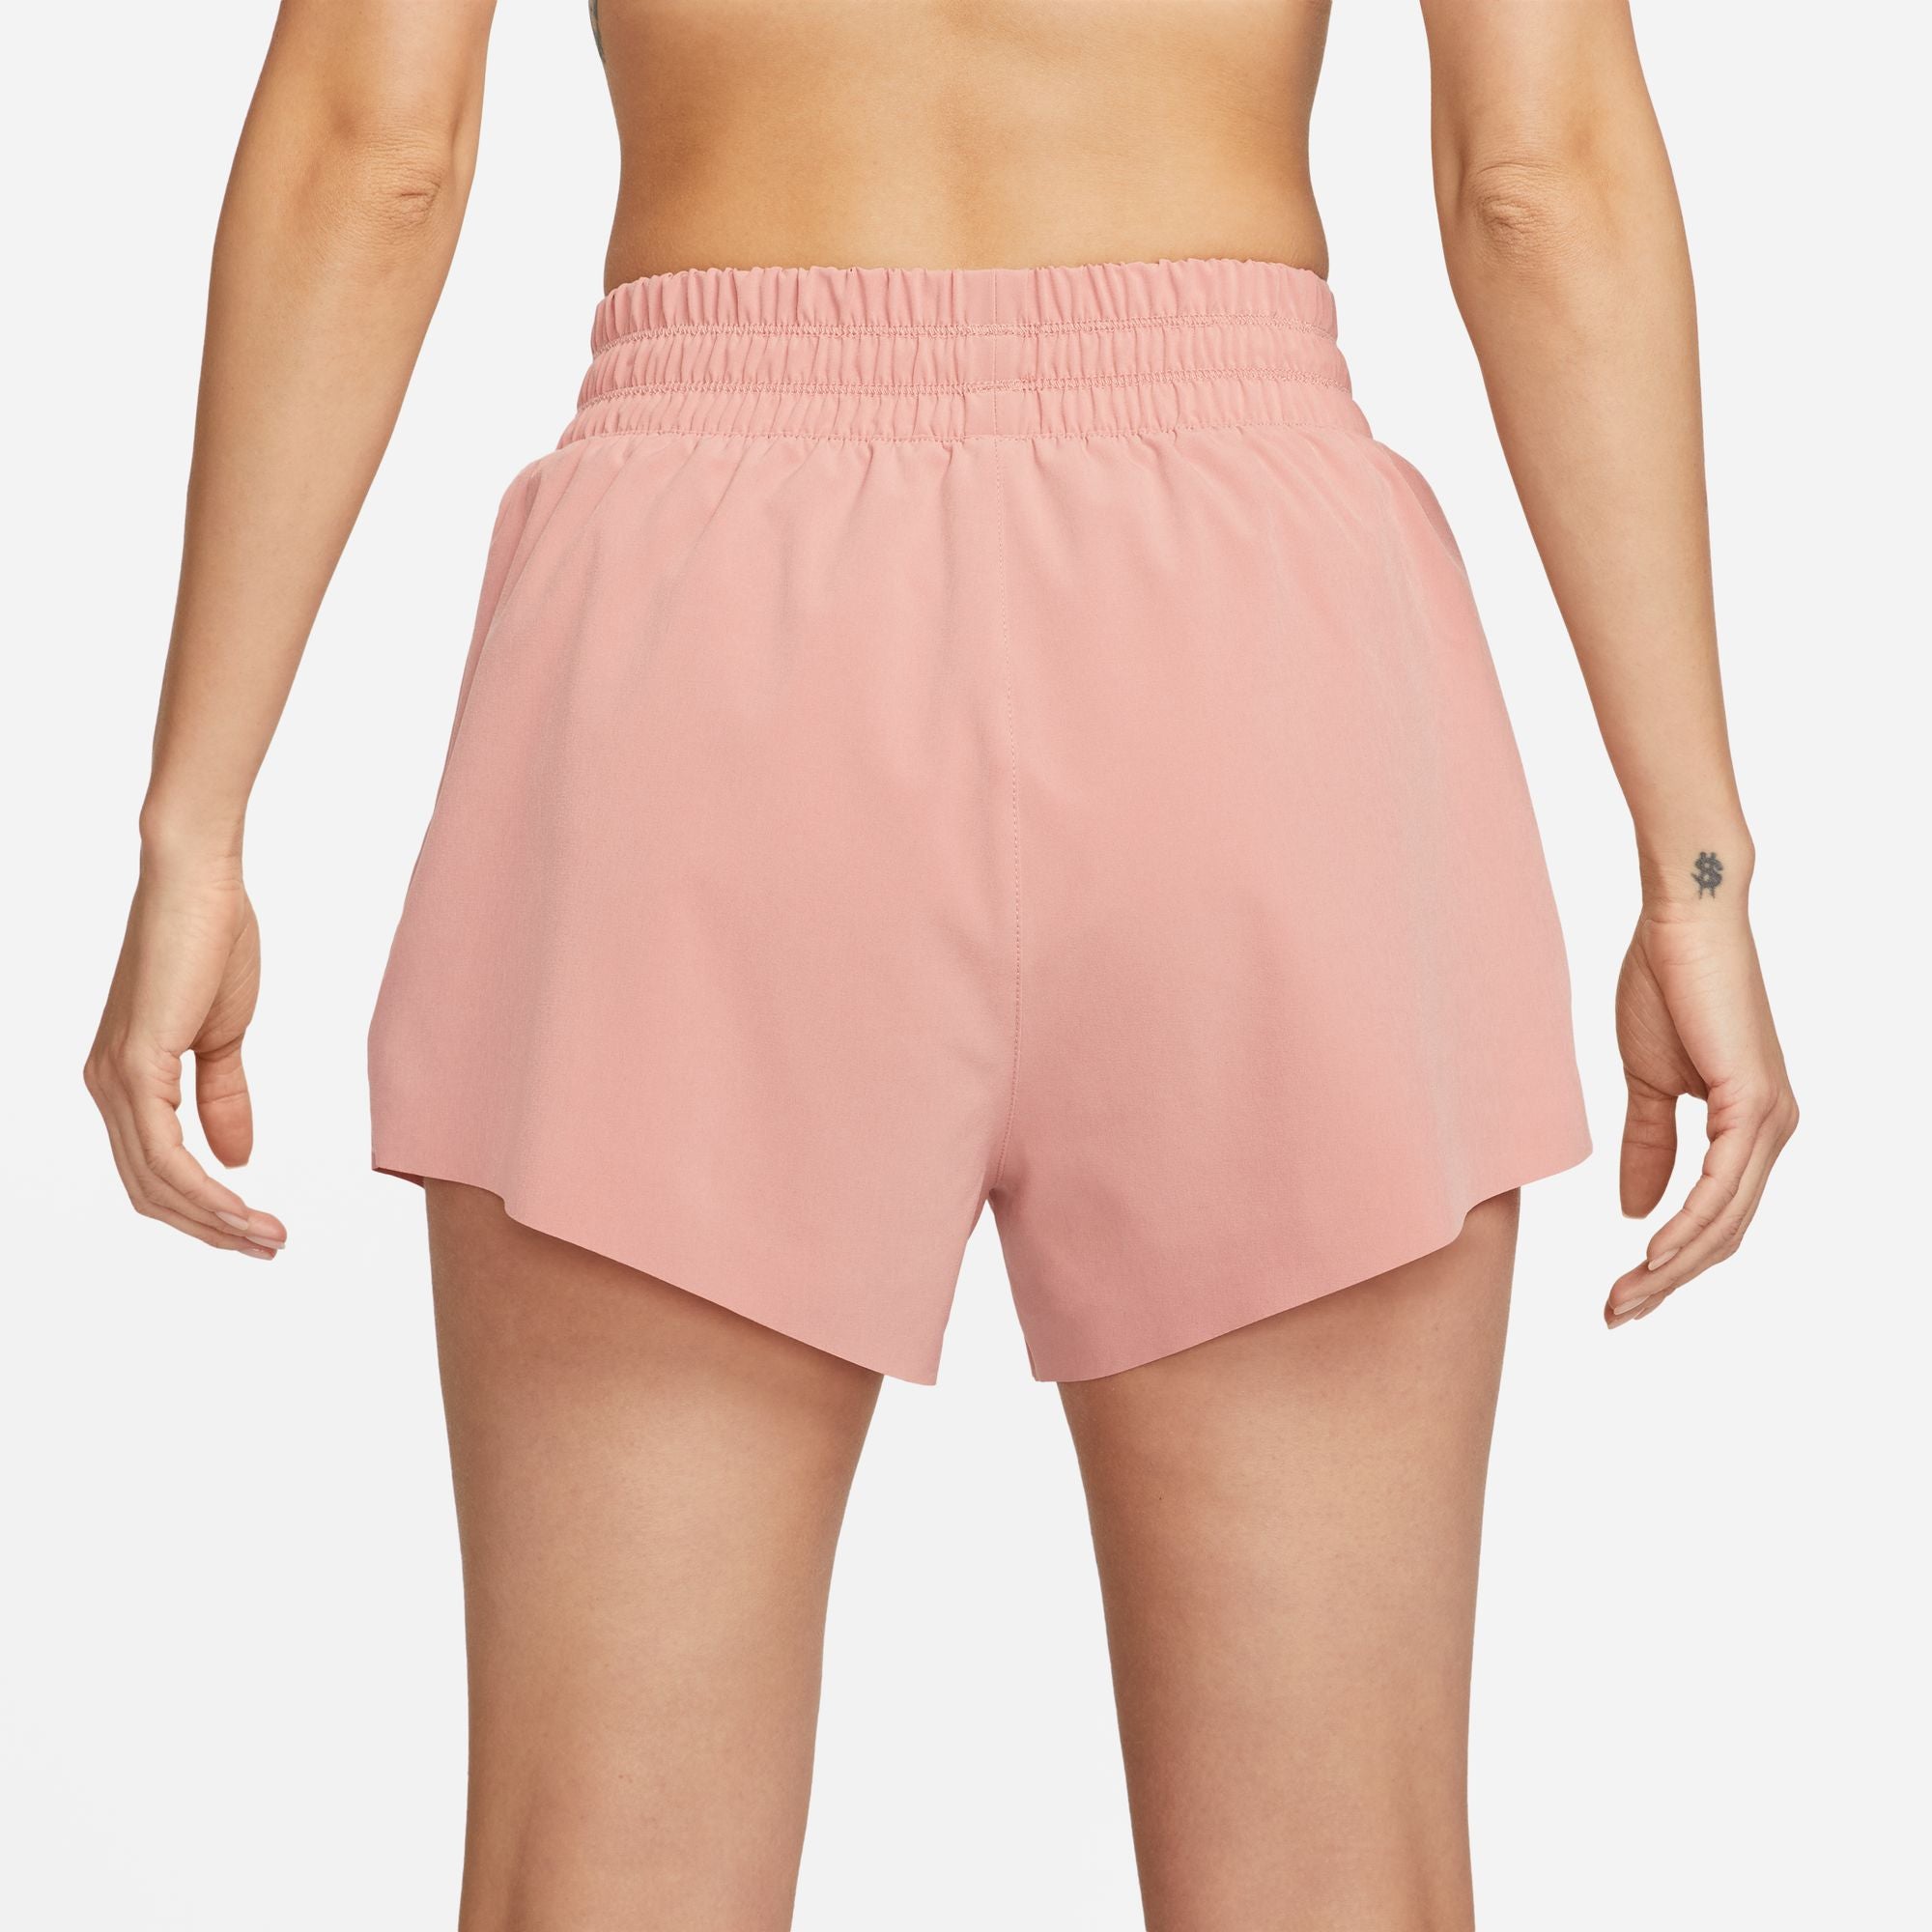 NIKE DRI-FIT RUNNING DIVISION WOMEN'S HIGH-WAISTED 3" BRIEF-LINED RUNNING SHORTS WITH POCKETS